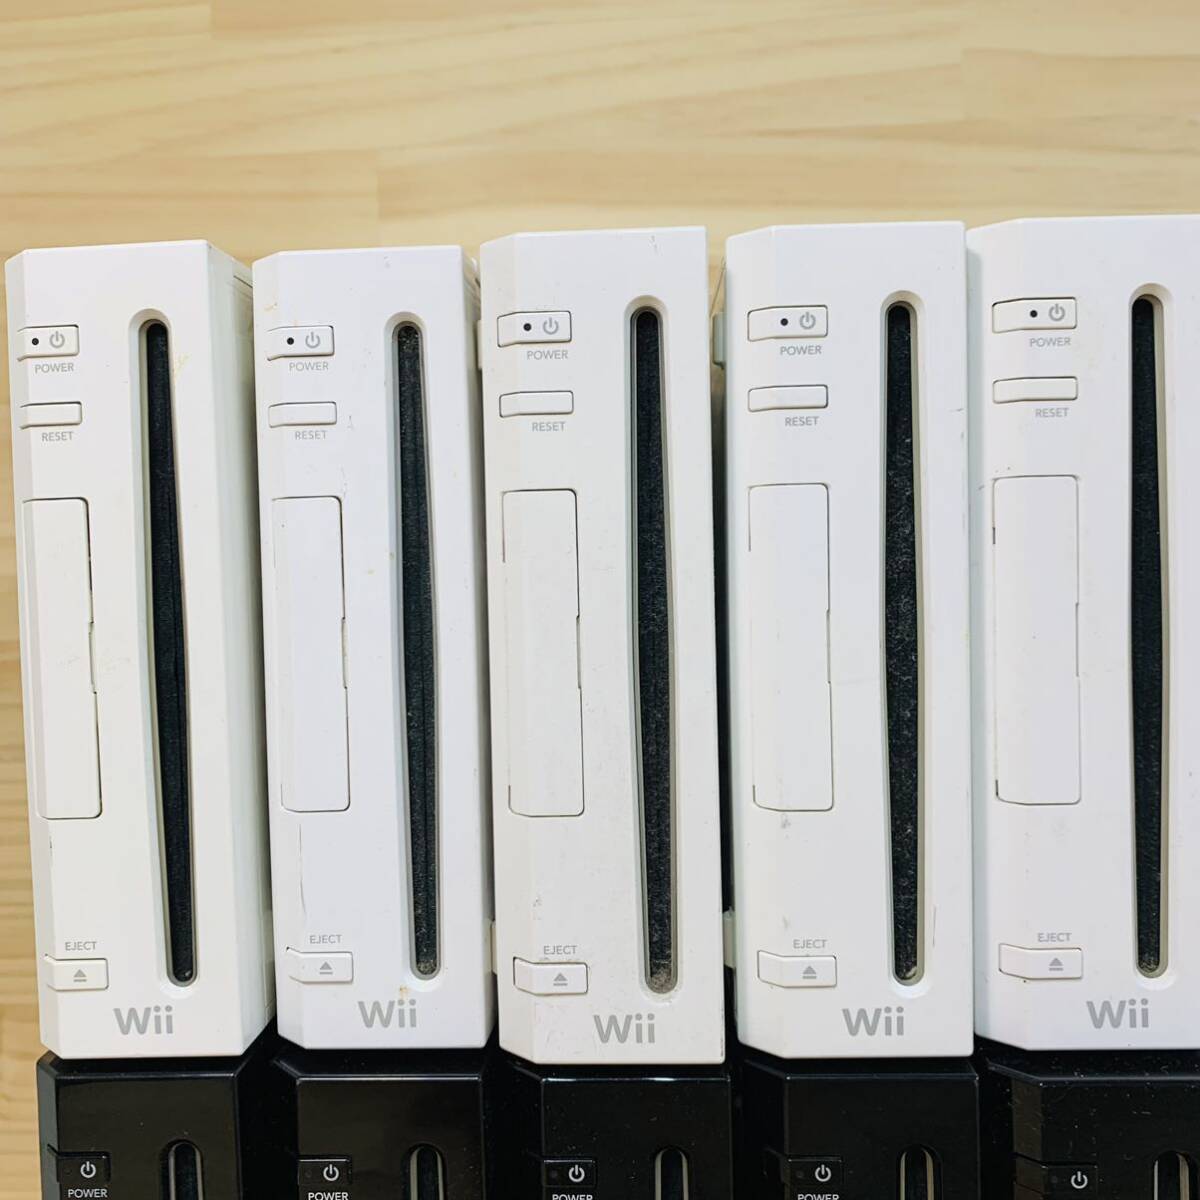 AAG38529 まとめ売り ジャンク品 Wii 本体 20台セット_画像2